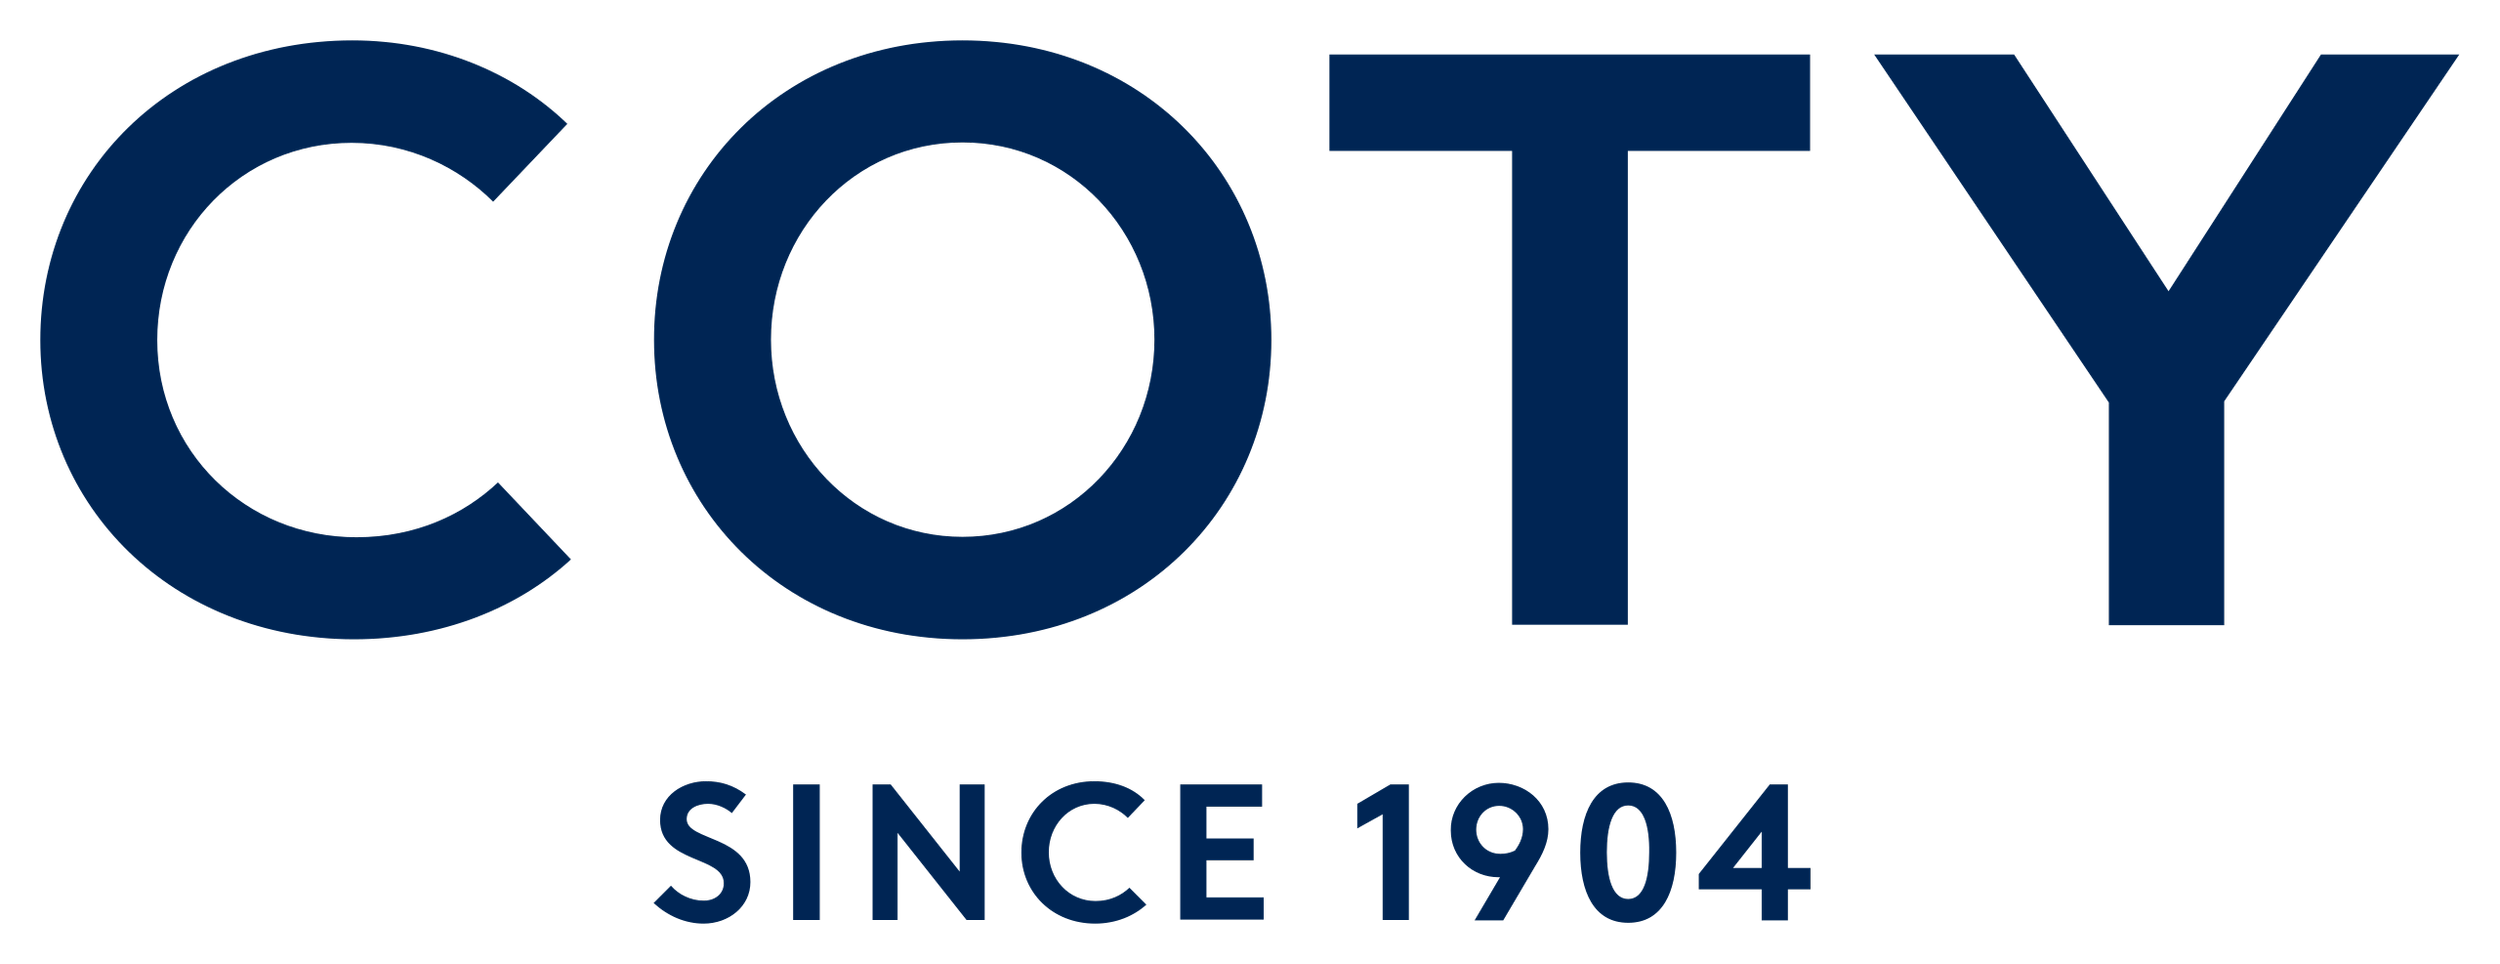 Coty_logo.png